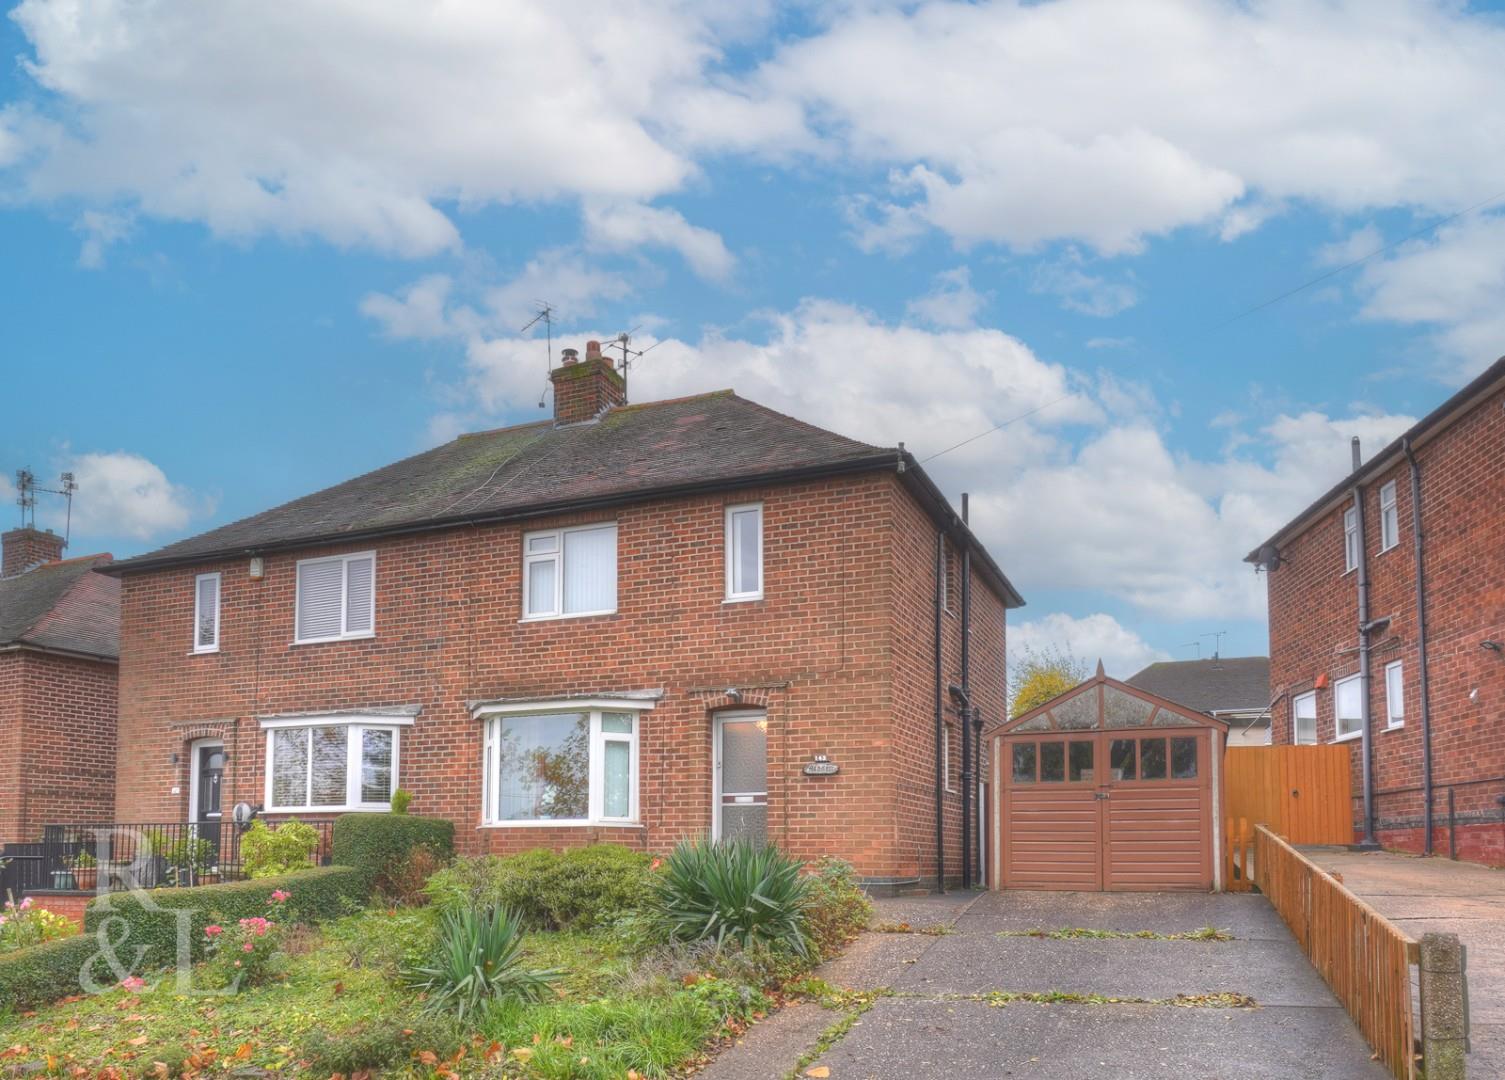 Property image for Foxhill Road, Carlton, Nottingham